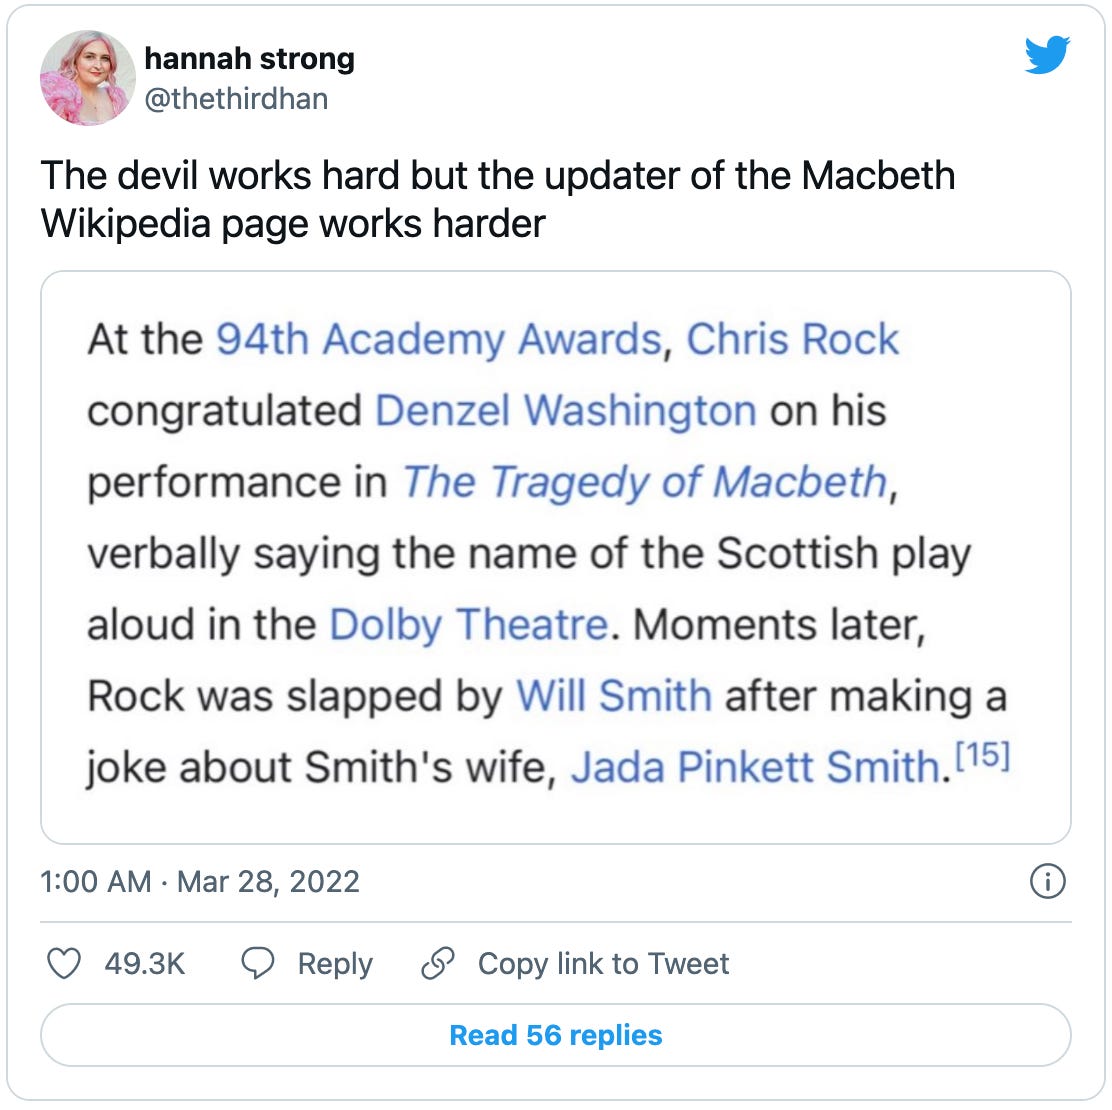 Tweet from @thethidhan that reads “The devil works hard but the updater of the Macbeth Wikipedia page works harder,” with a screenshot from wikipedia reading: “At the 94th Academy Awards, Chris Rock congratulated Denzel Washington on his performance in The Tragedy of Macbeth, verbally saying the name of the Scottish play aloud in the Dolby Theatre. Moments later, Rock was slapped by Will Smith after making a joke about Smith's wife, Jada Pinkett Smith.”